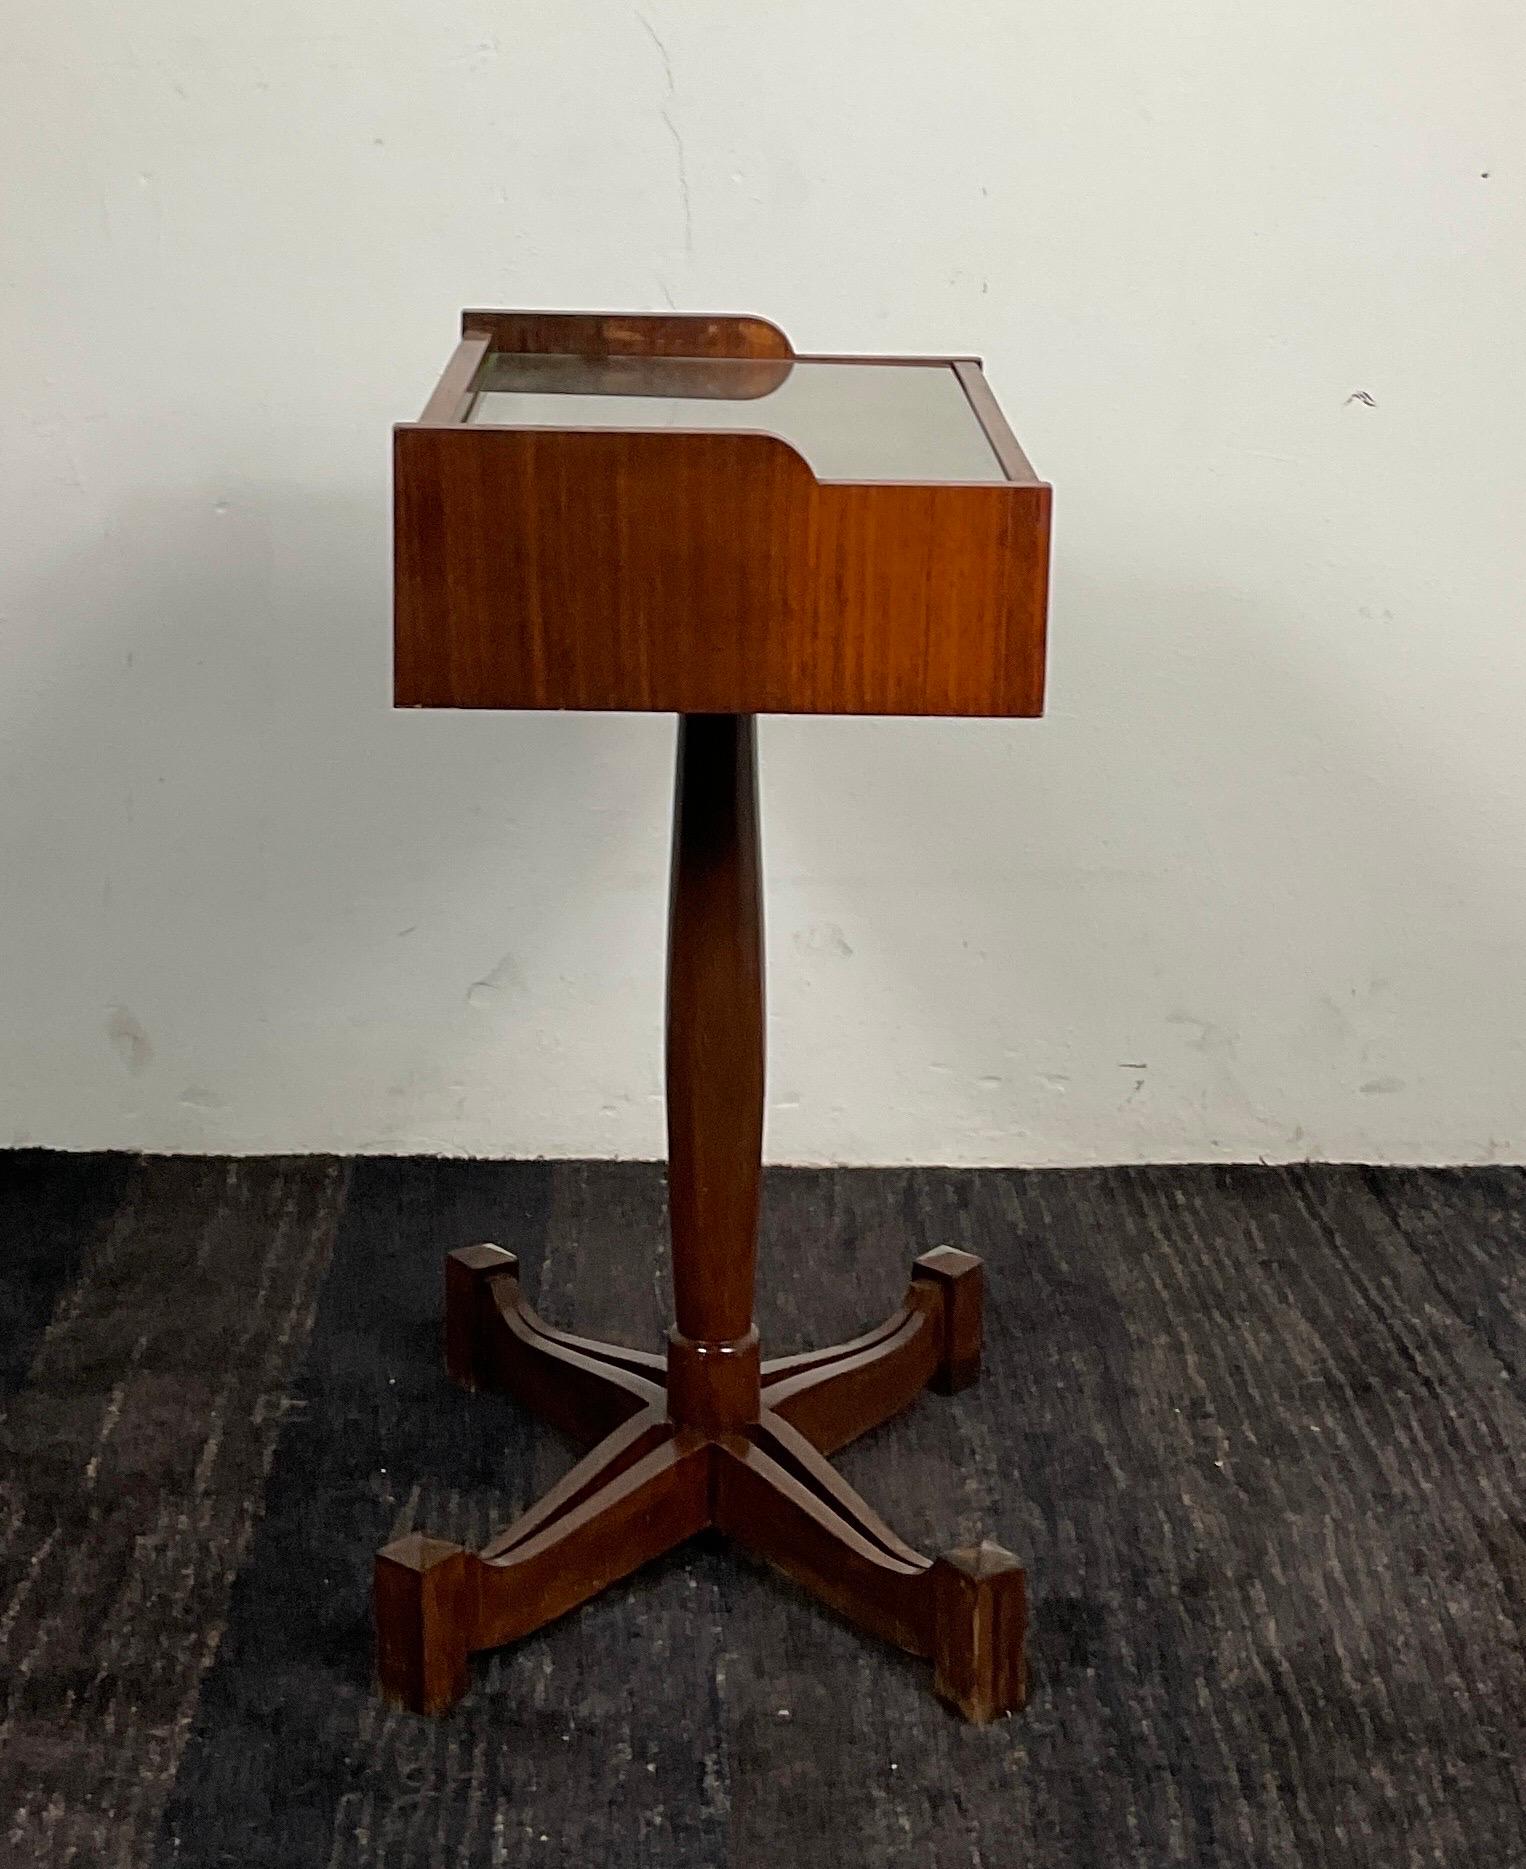 Wooden Nightstand Sc 50 Model by Carlo Salocchi for Sormani 60's, Italy For Sale 4